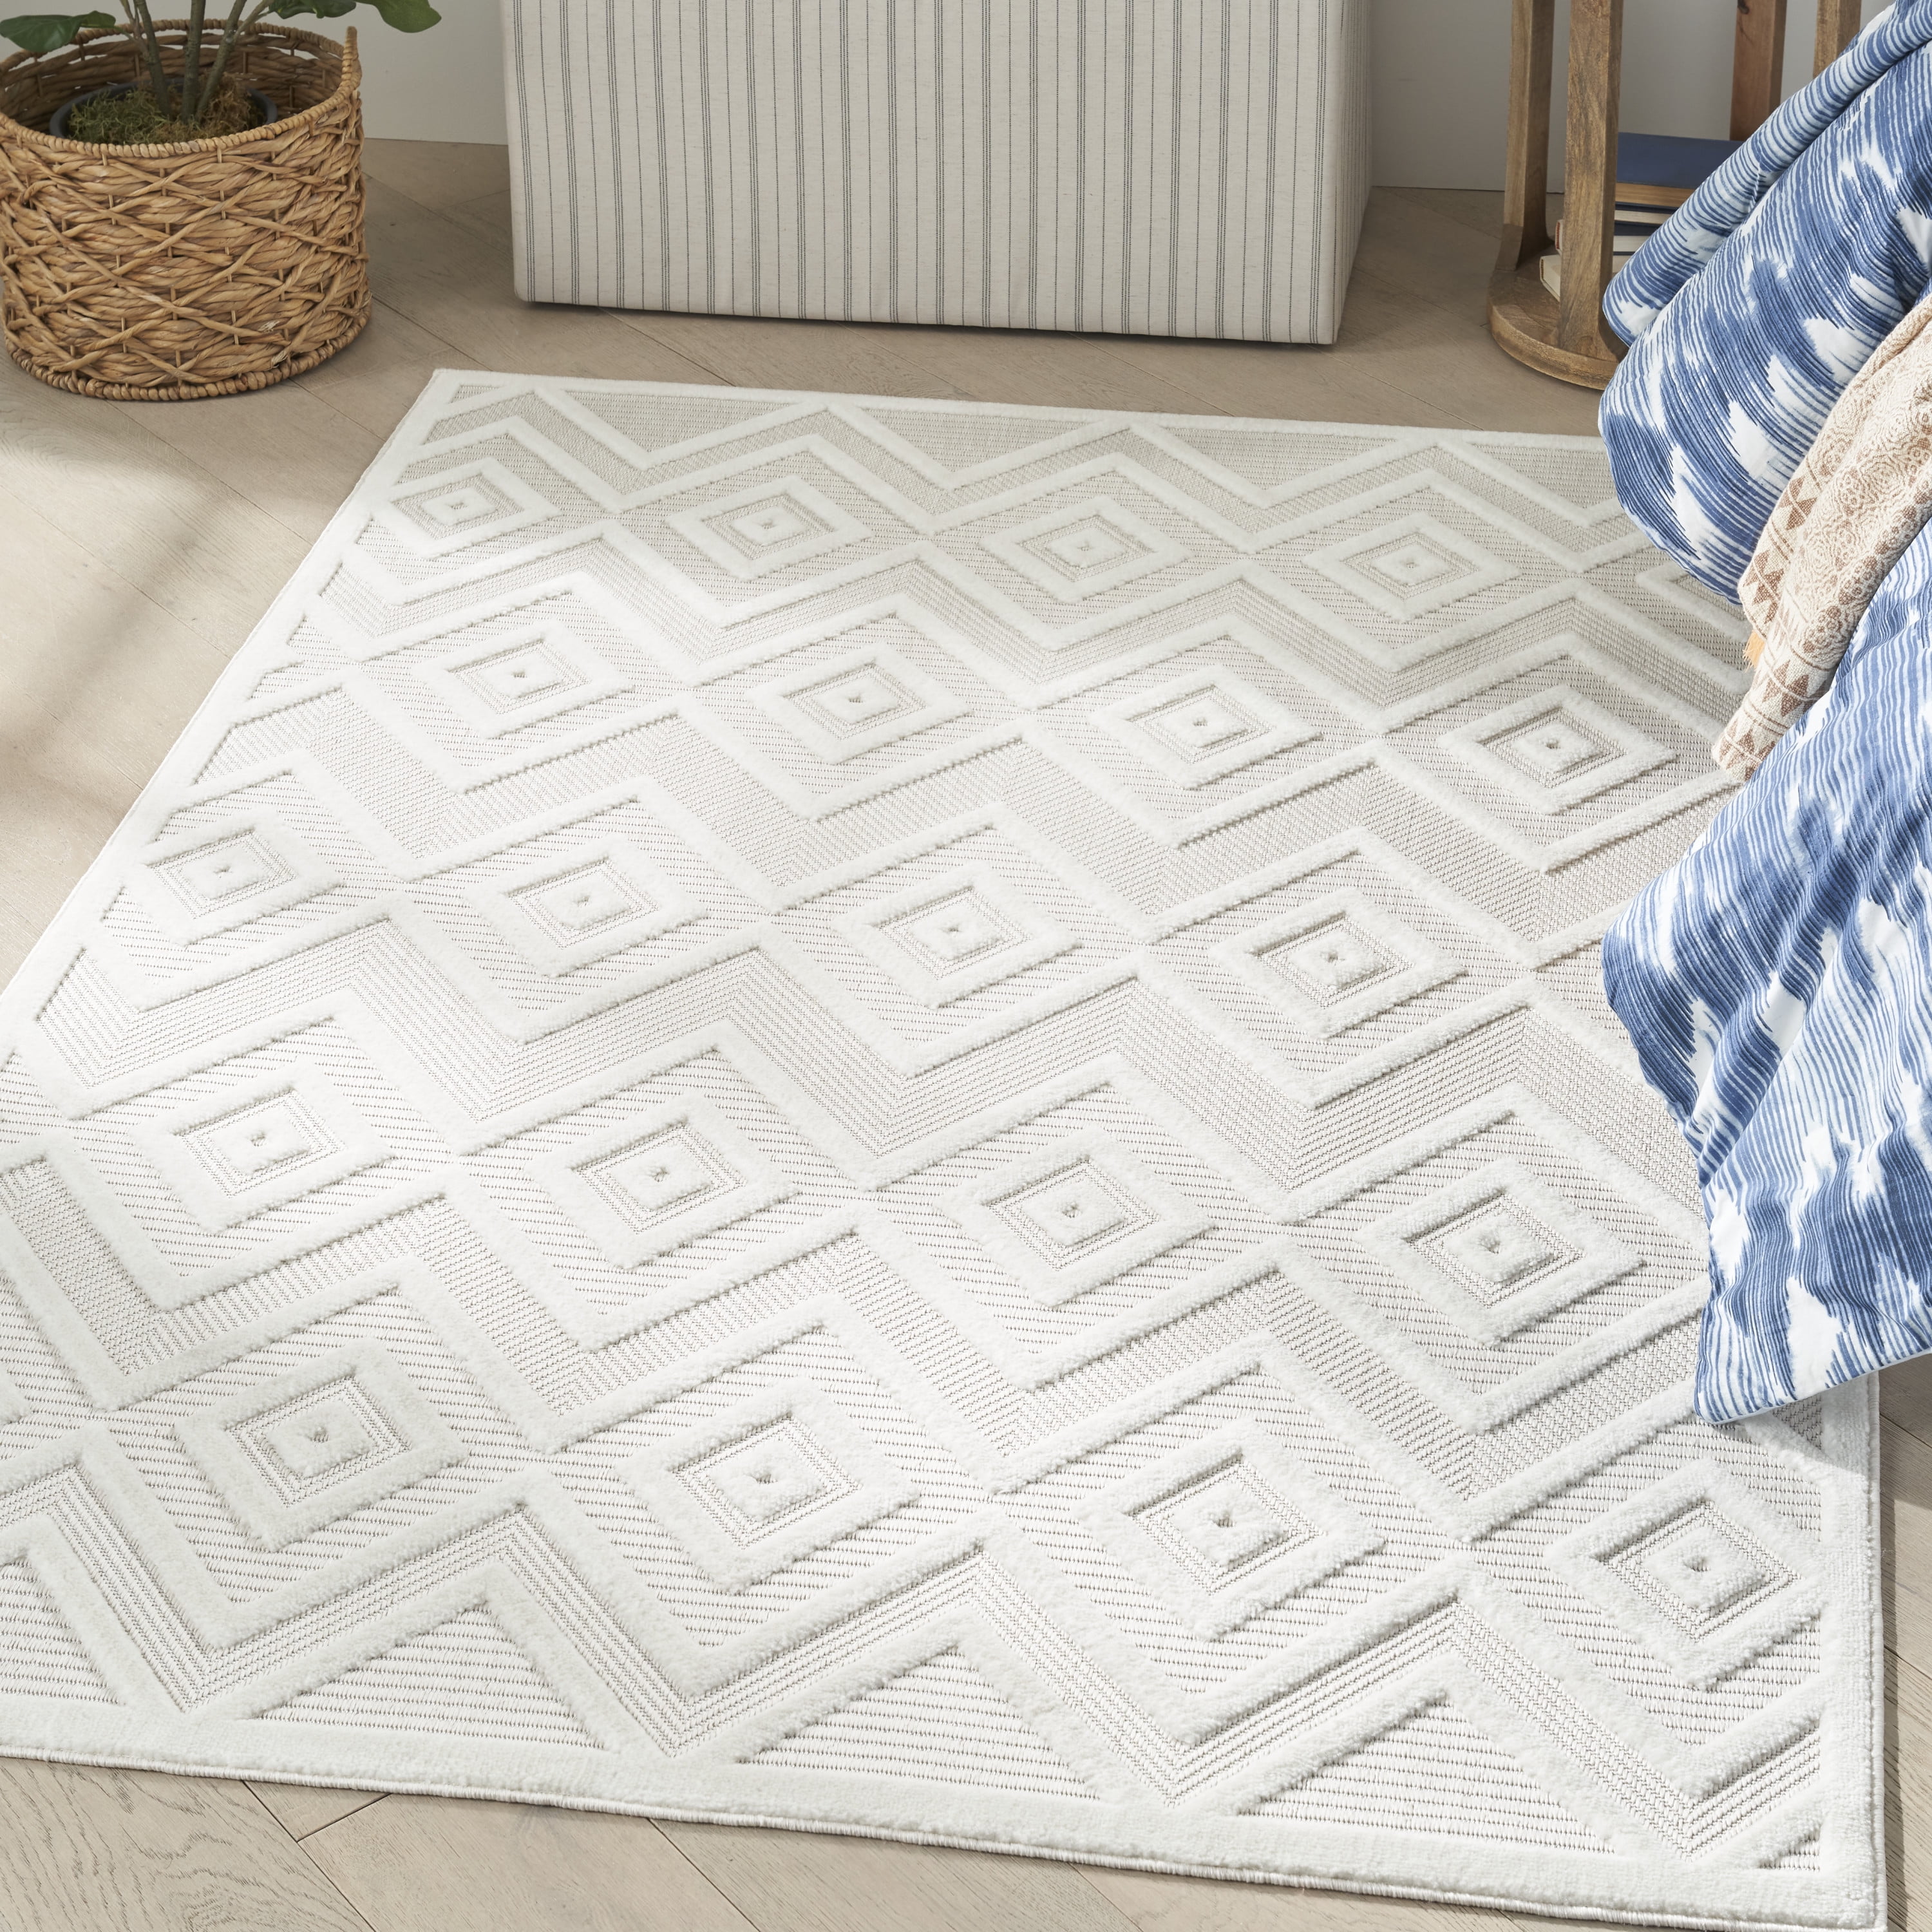 Loloi Norabel NOR-01 Ivory Multi Rug - 5 ft x 7 ft 6 in